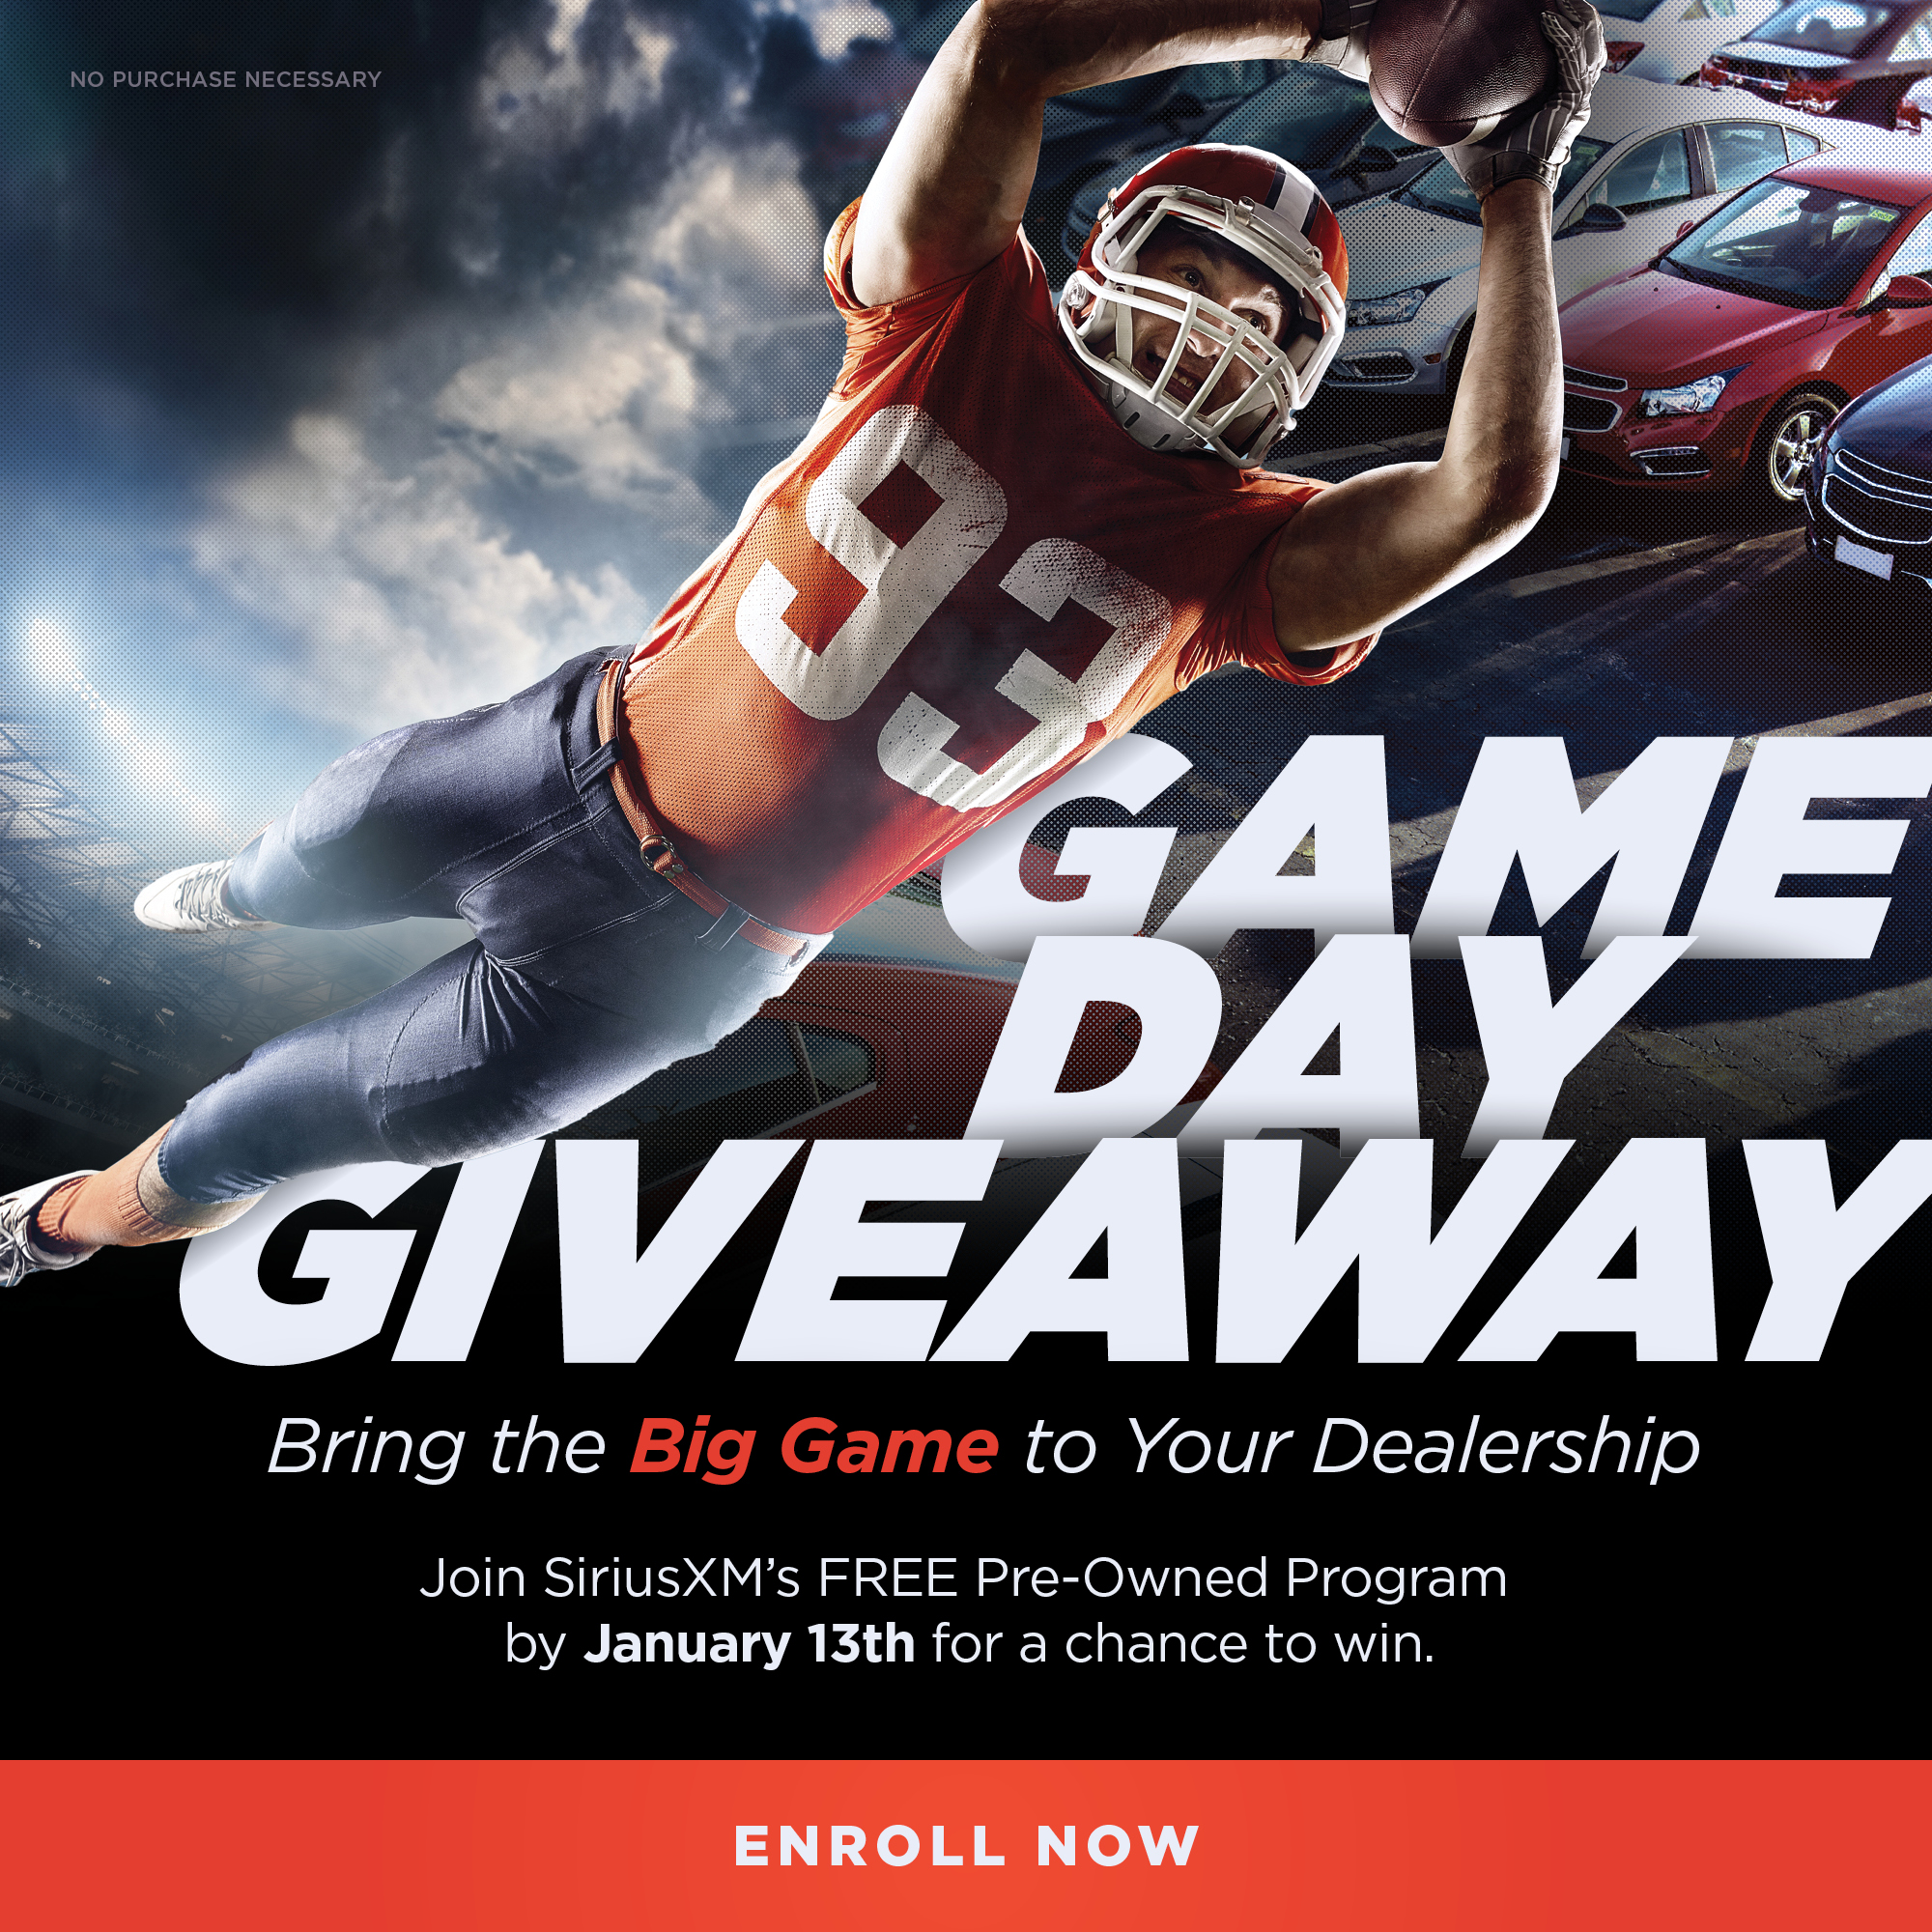 Join by January 13th for a chance to bring an incredible Big Game event to your dealership.